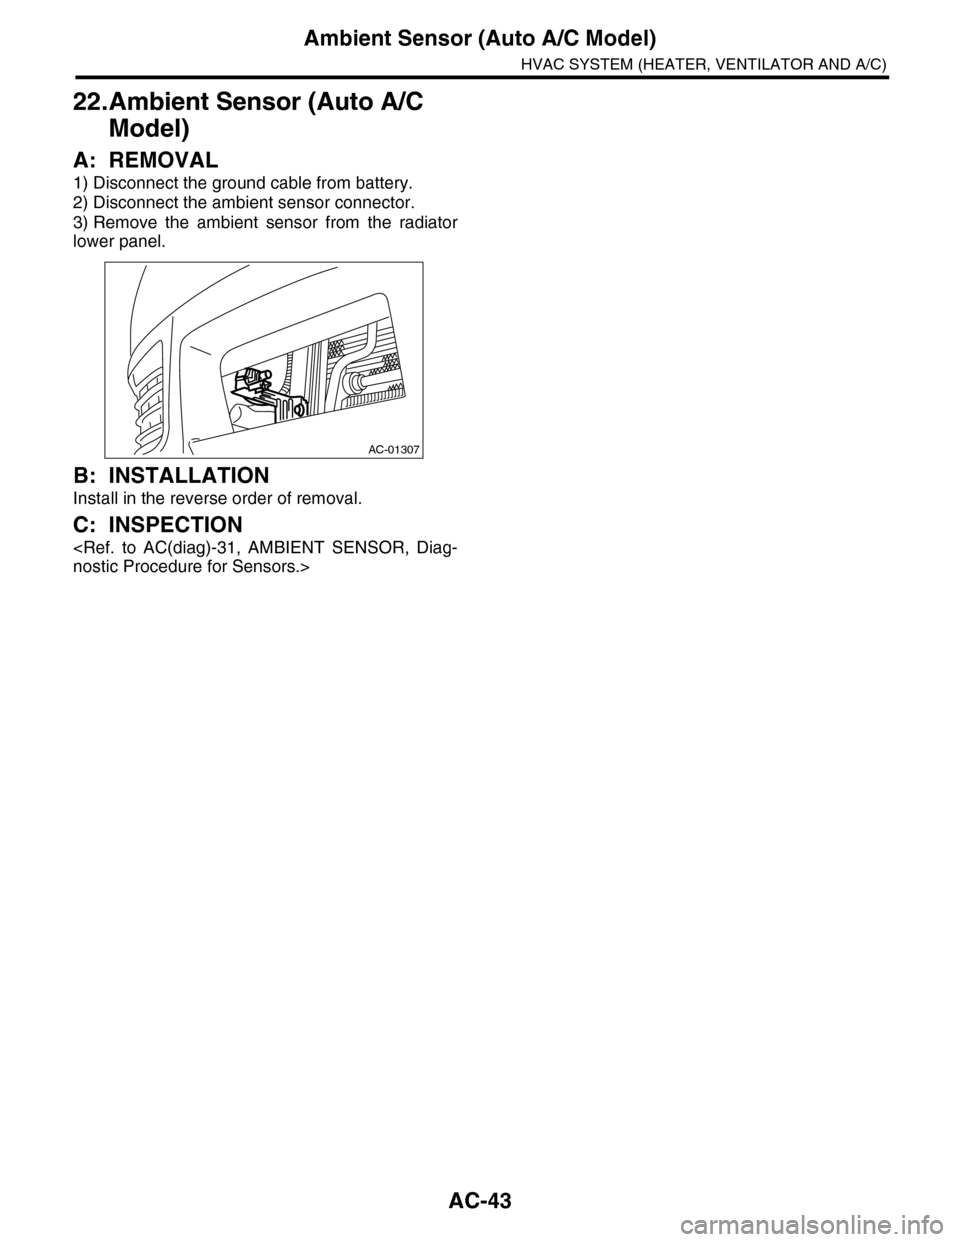 SUBARU TRIBECA 2009 1.G Service Manual PDF AC-43
Ambient Sensor (Auto A/C Model)
HVAC SYSTEM (HEATER, VENTILATOR AND A/C)
22.Ambient Sensor (Auto A/C 
Model)
A: REMOVAL
1) Disconnect the ground cable from battery.
2) Disconnect the ambient sen